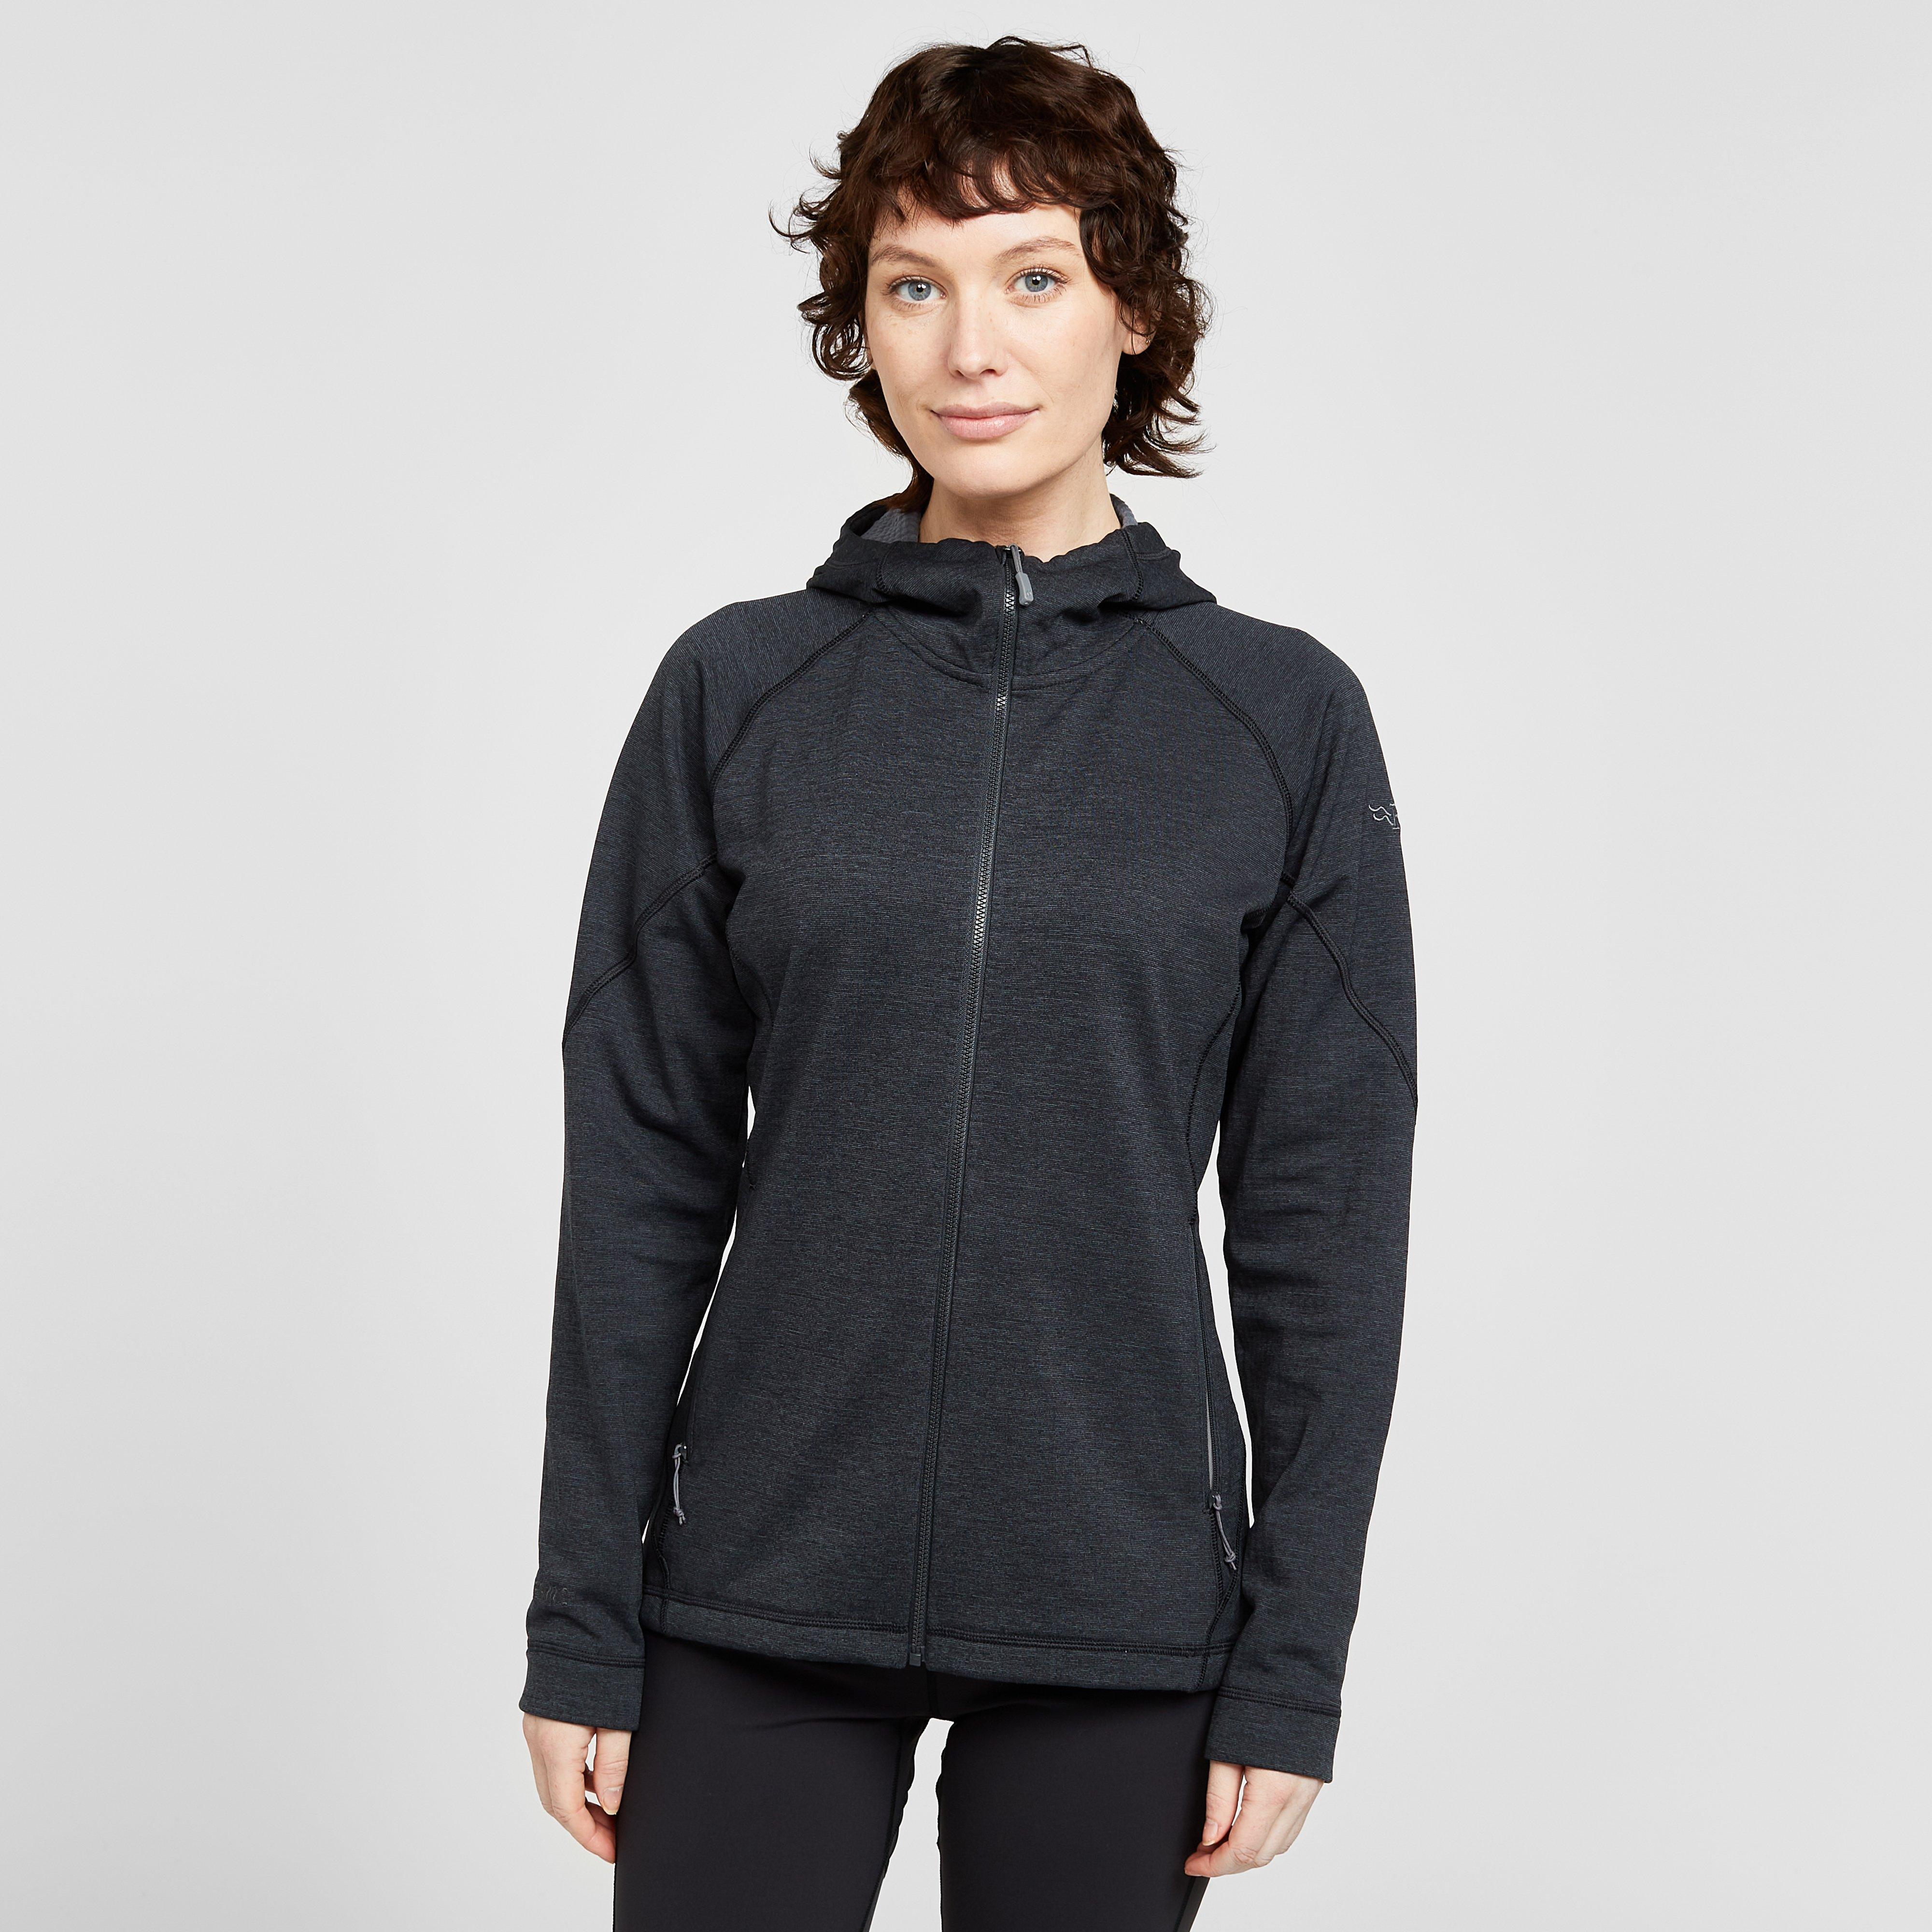 Rab Womens Nucleus Hoody - Gry$/gry$  Gry$/gry$